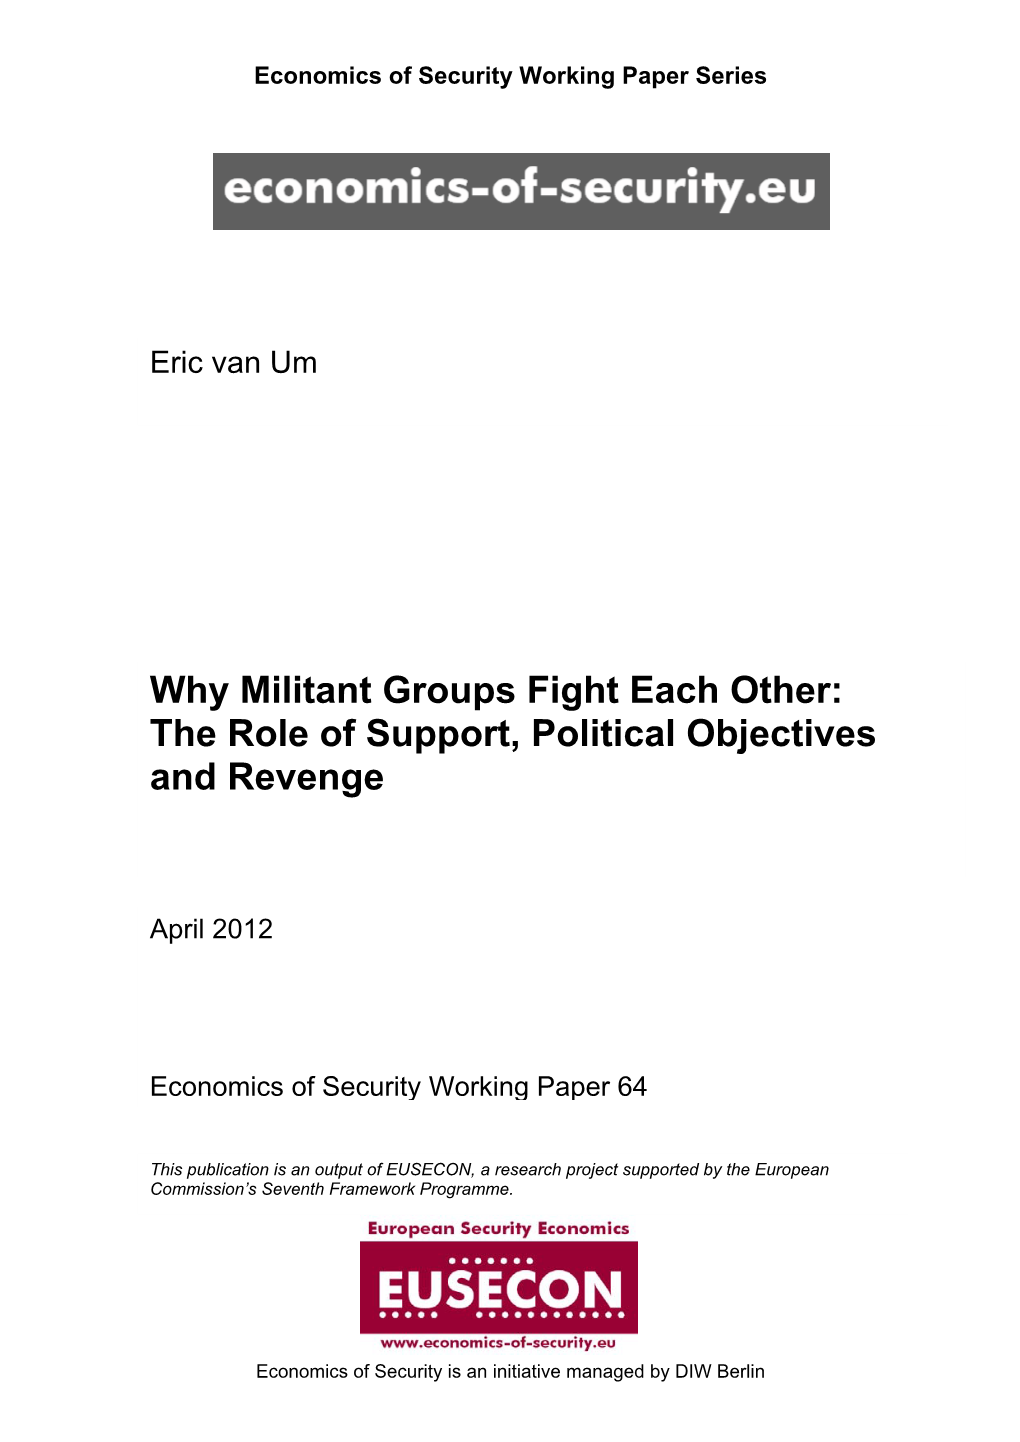 Why Militant Groups Fight Each Other